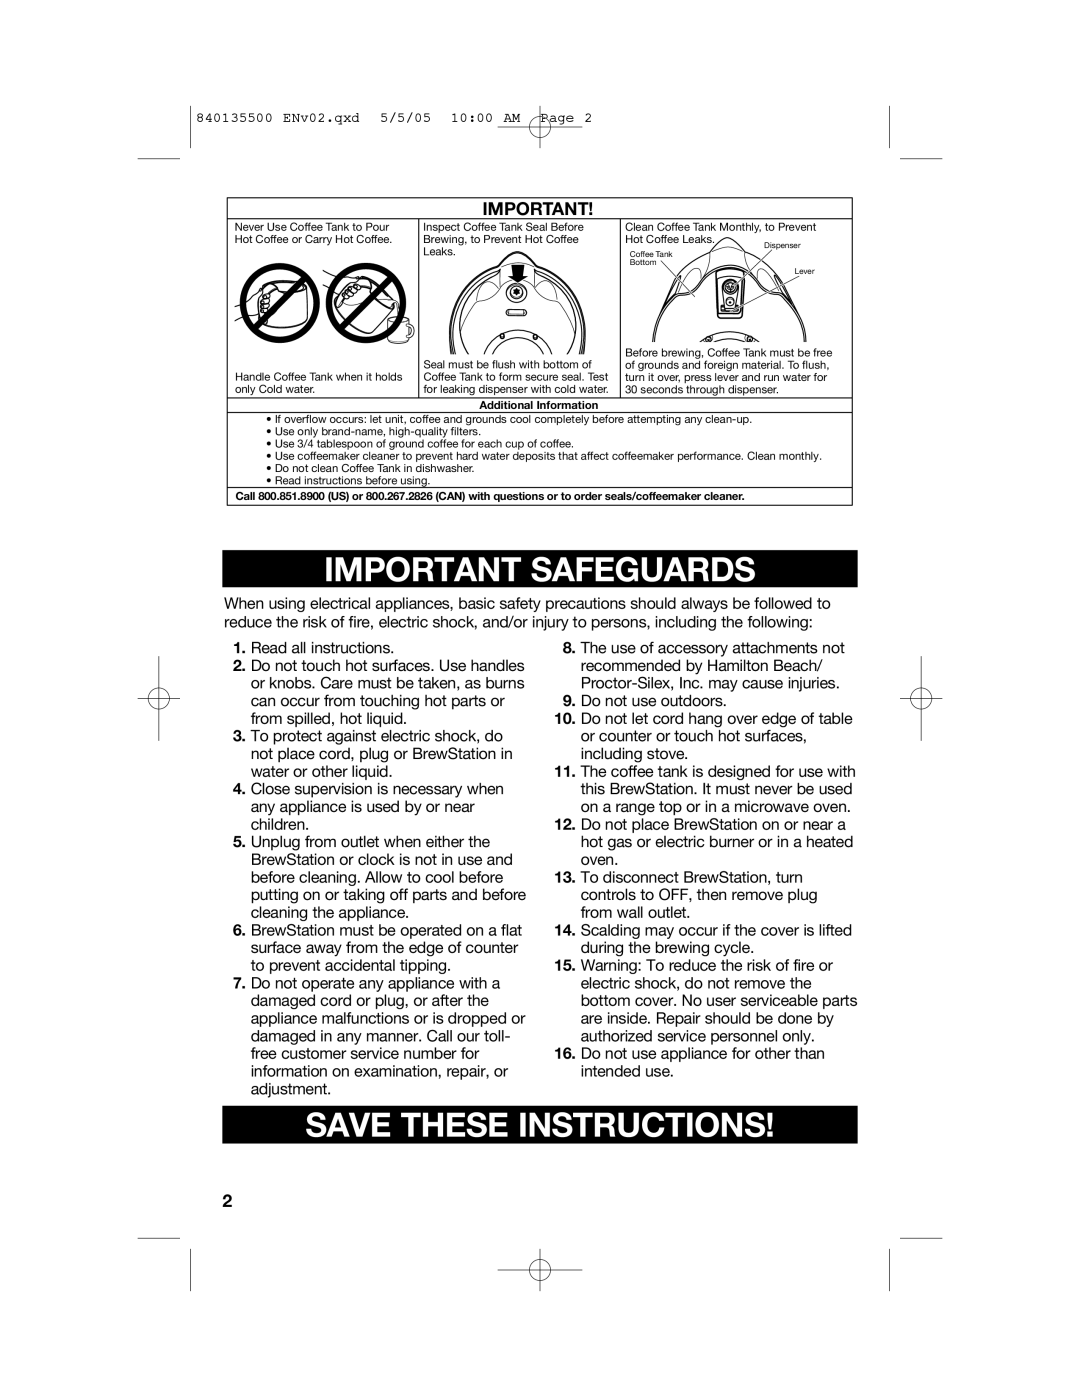 Hamilton Beach 47451 manual Important Safeguards, Save These Instructions 